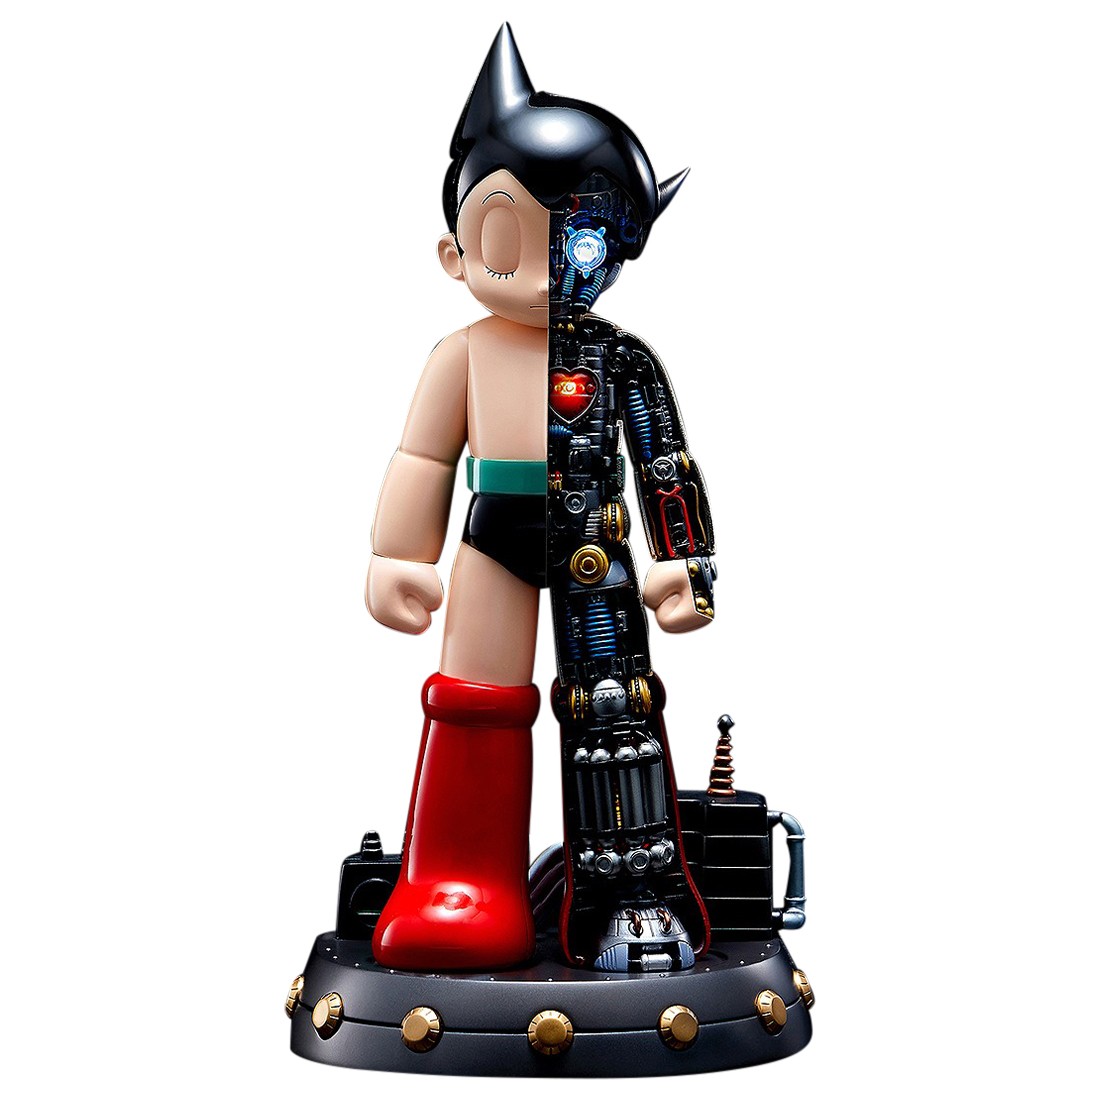 Blitzway The Real Series Astro Boy Normal Ver. Superb Anime Statue tan